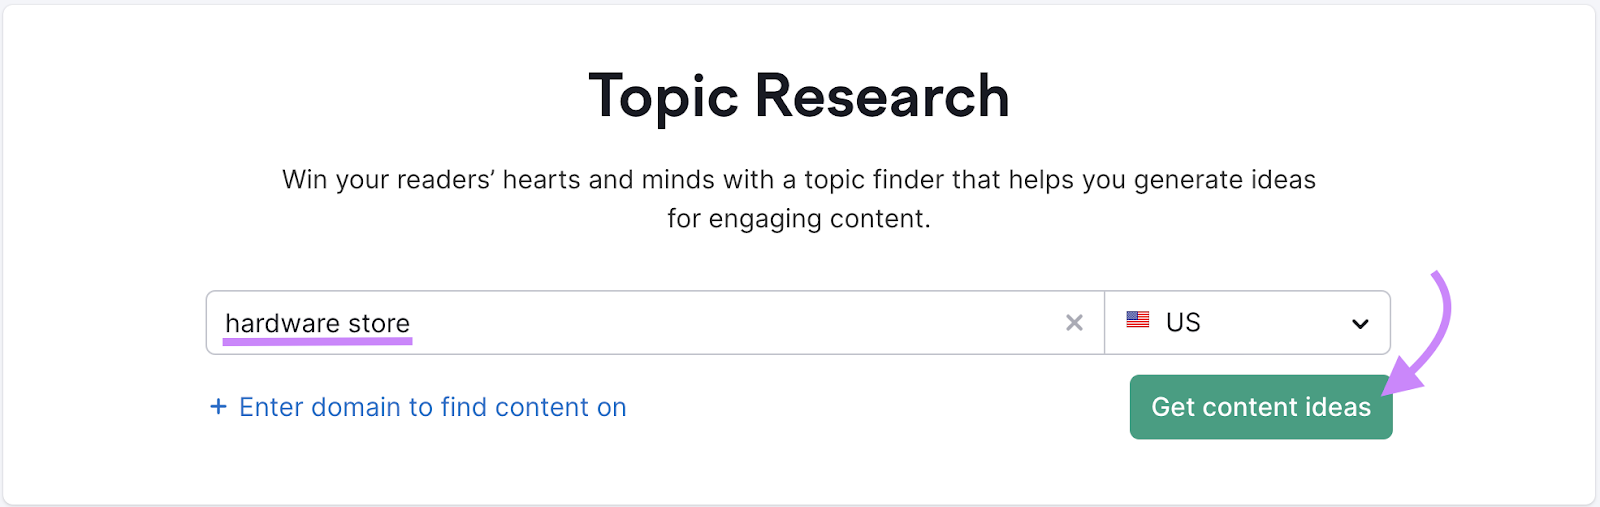 "hardware store" entered into Topic Research search bar